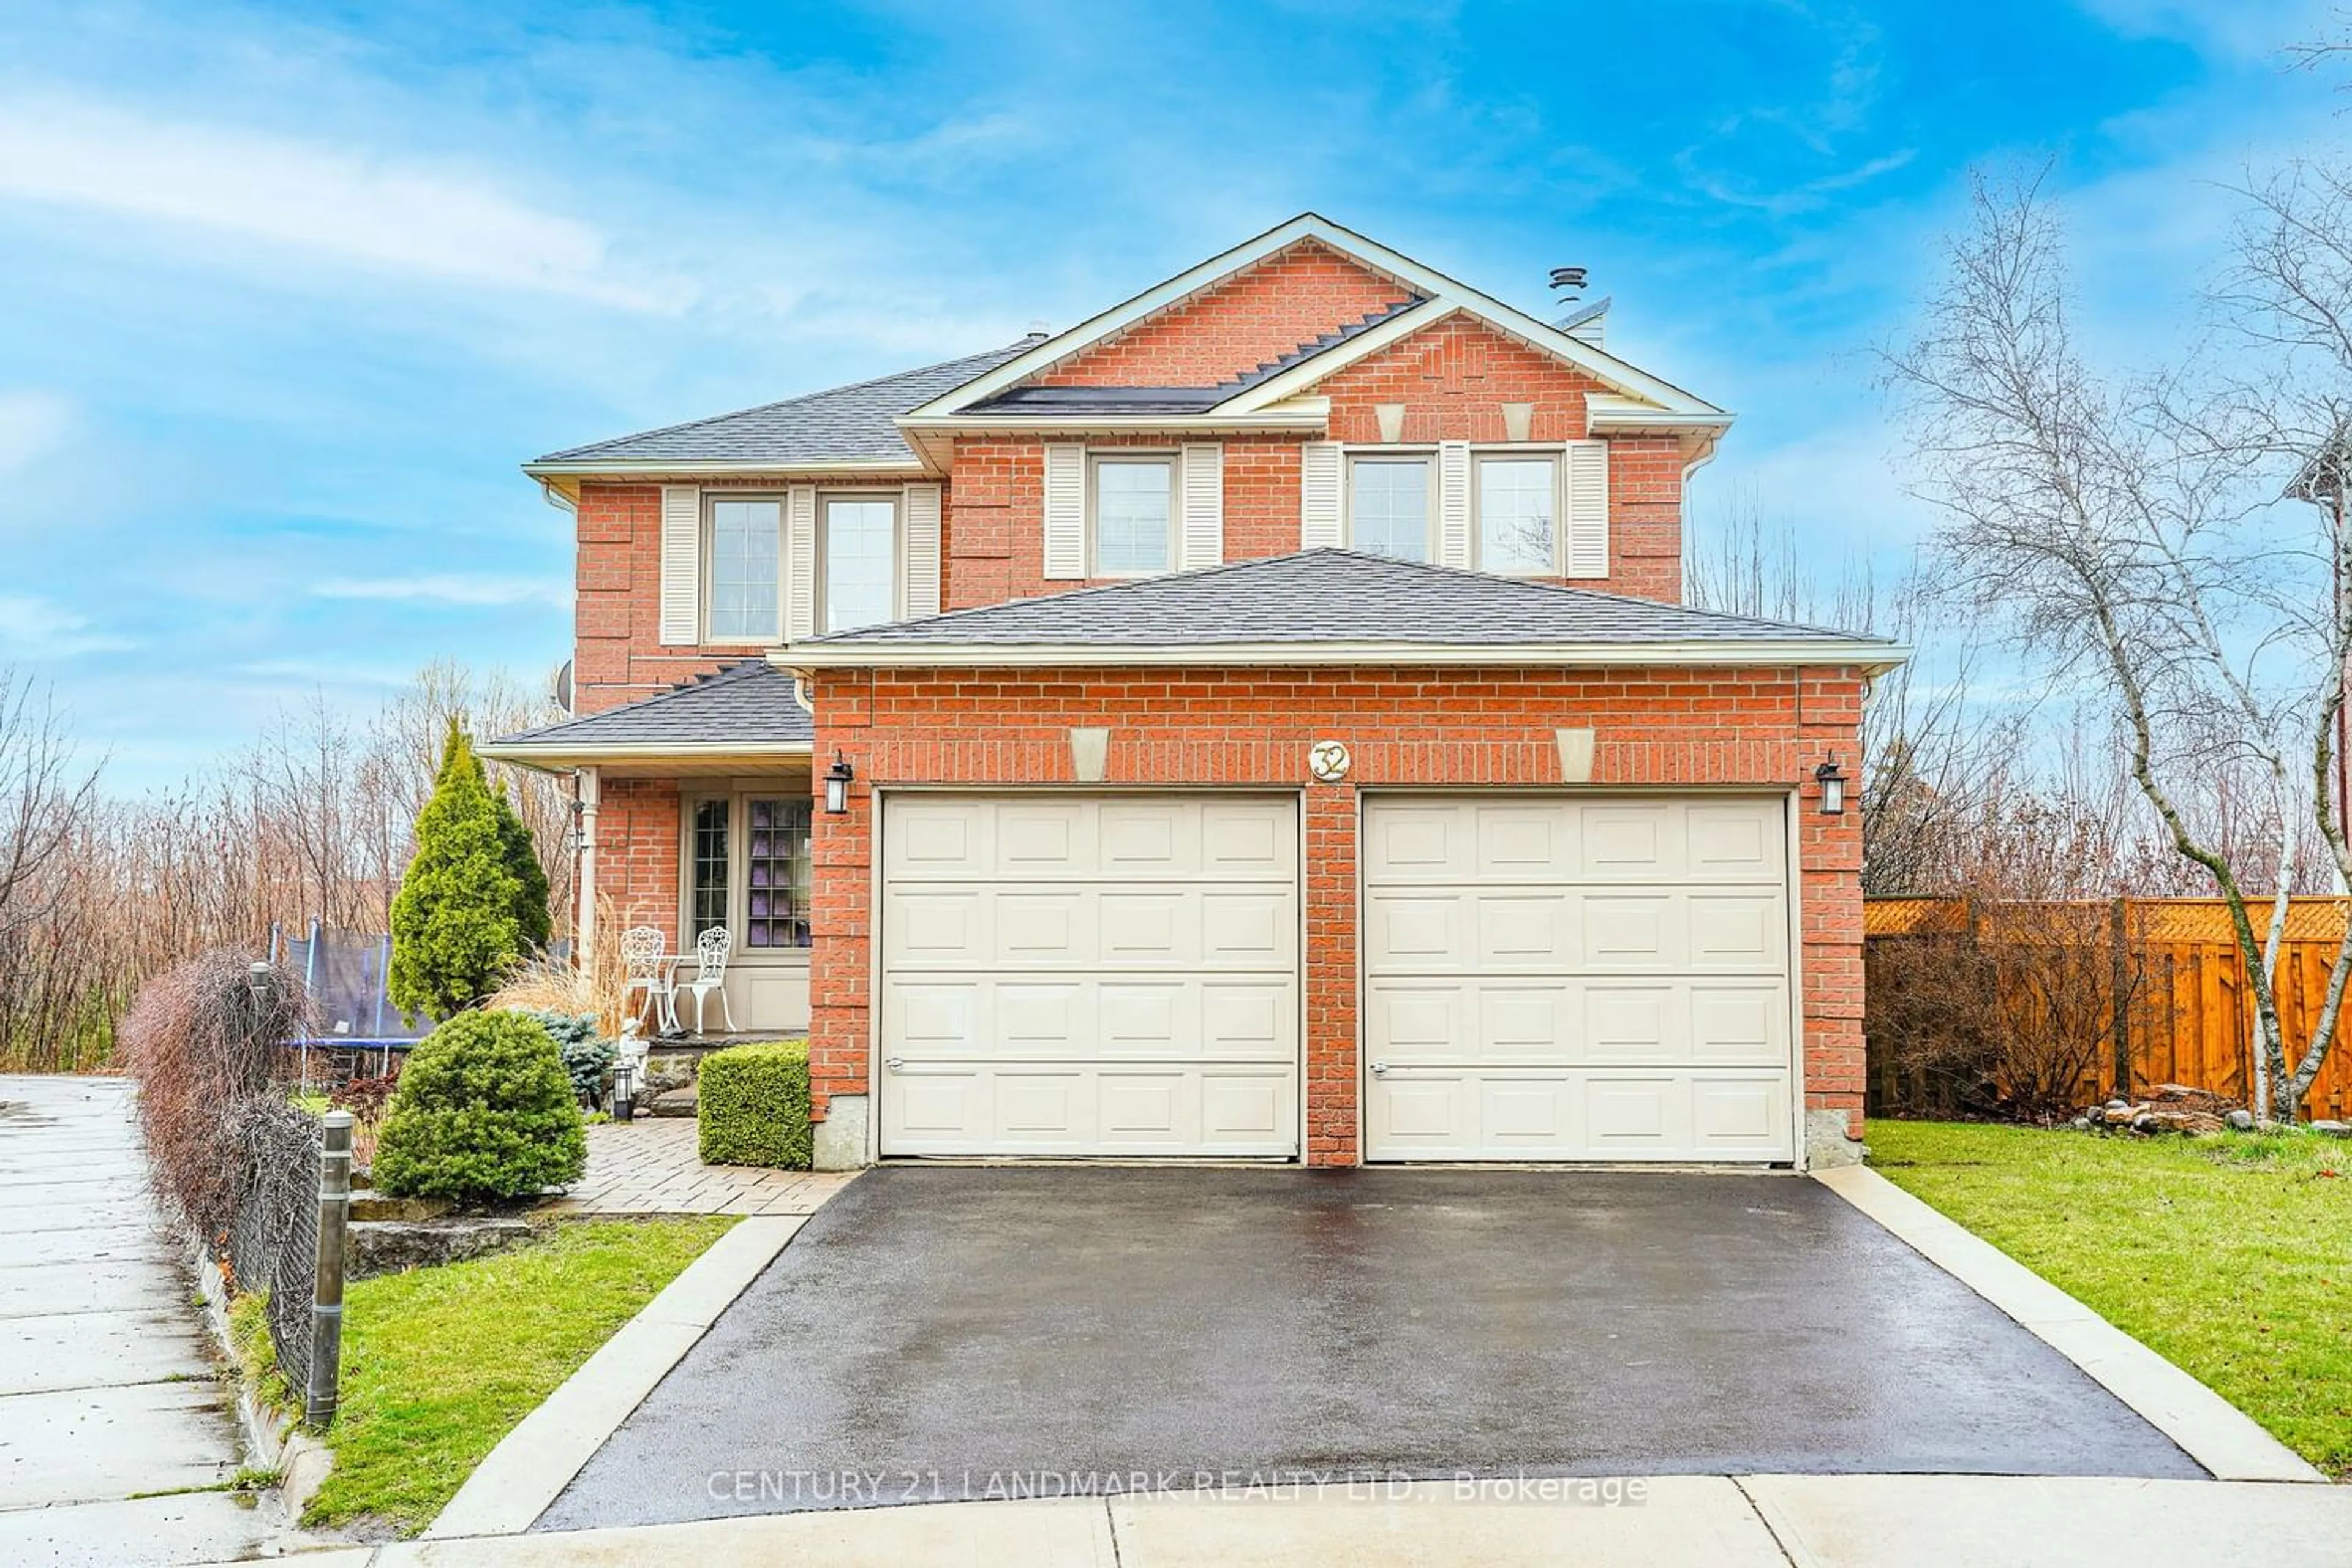 Home with brick exterior material for 32 Noake Cres, Ajax Ontario L1T 3L4